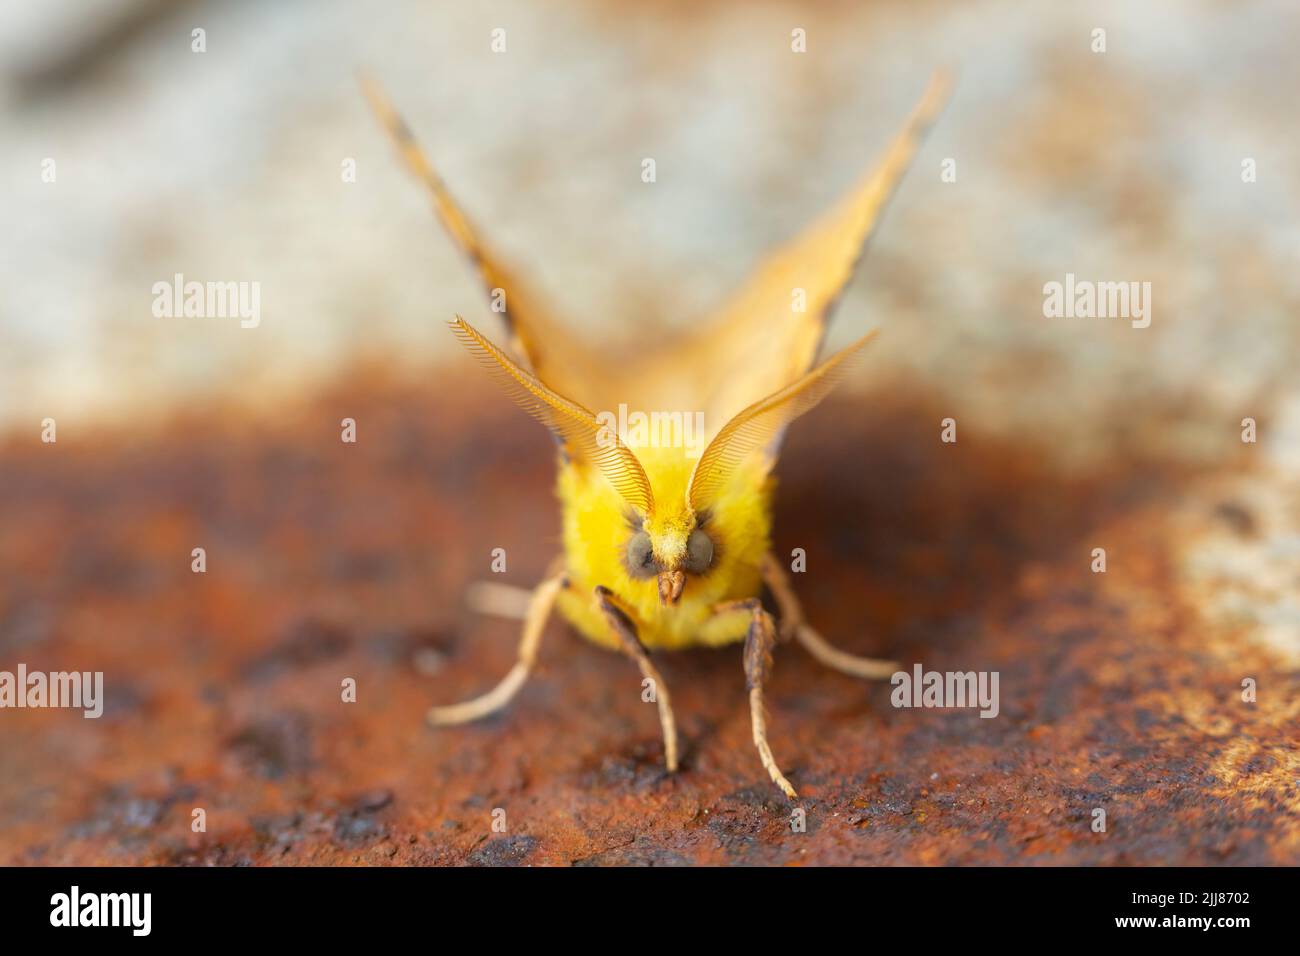 Canary-shouldered thorn Ennomos alniaria, imago roosting on rusty metal, Weston-Super-Mare, Somerset, UK, July Stock Photo